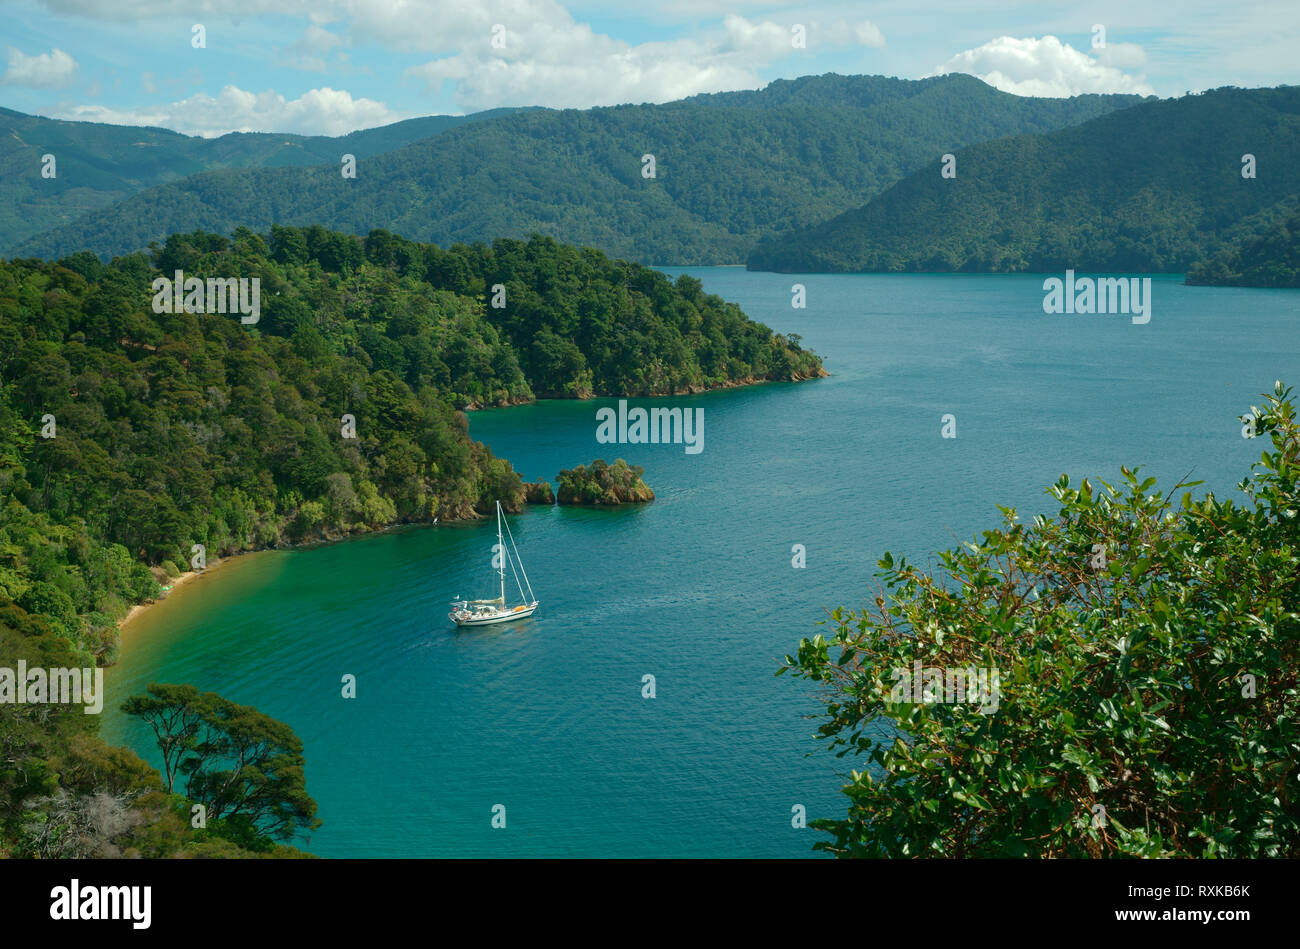 Tasman Bay, Cove with Yacht, North shore of South Island of New Zealand. Viewed from Appleby Highway Stock Photo